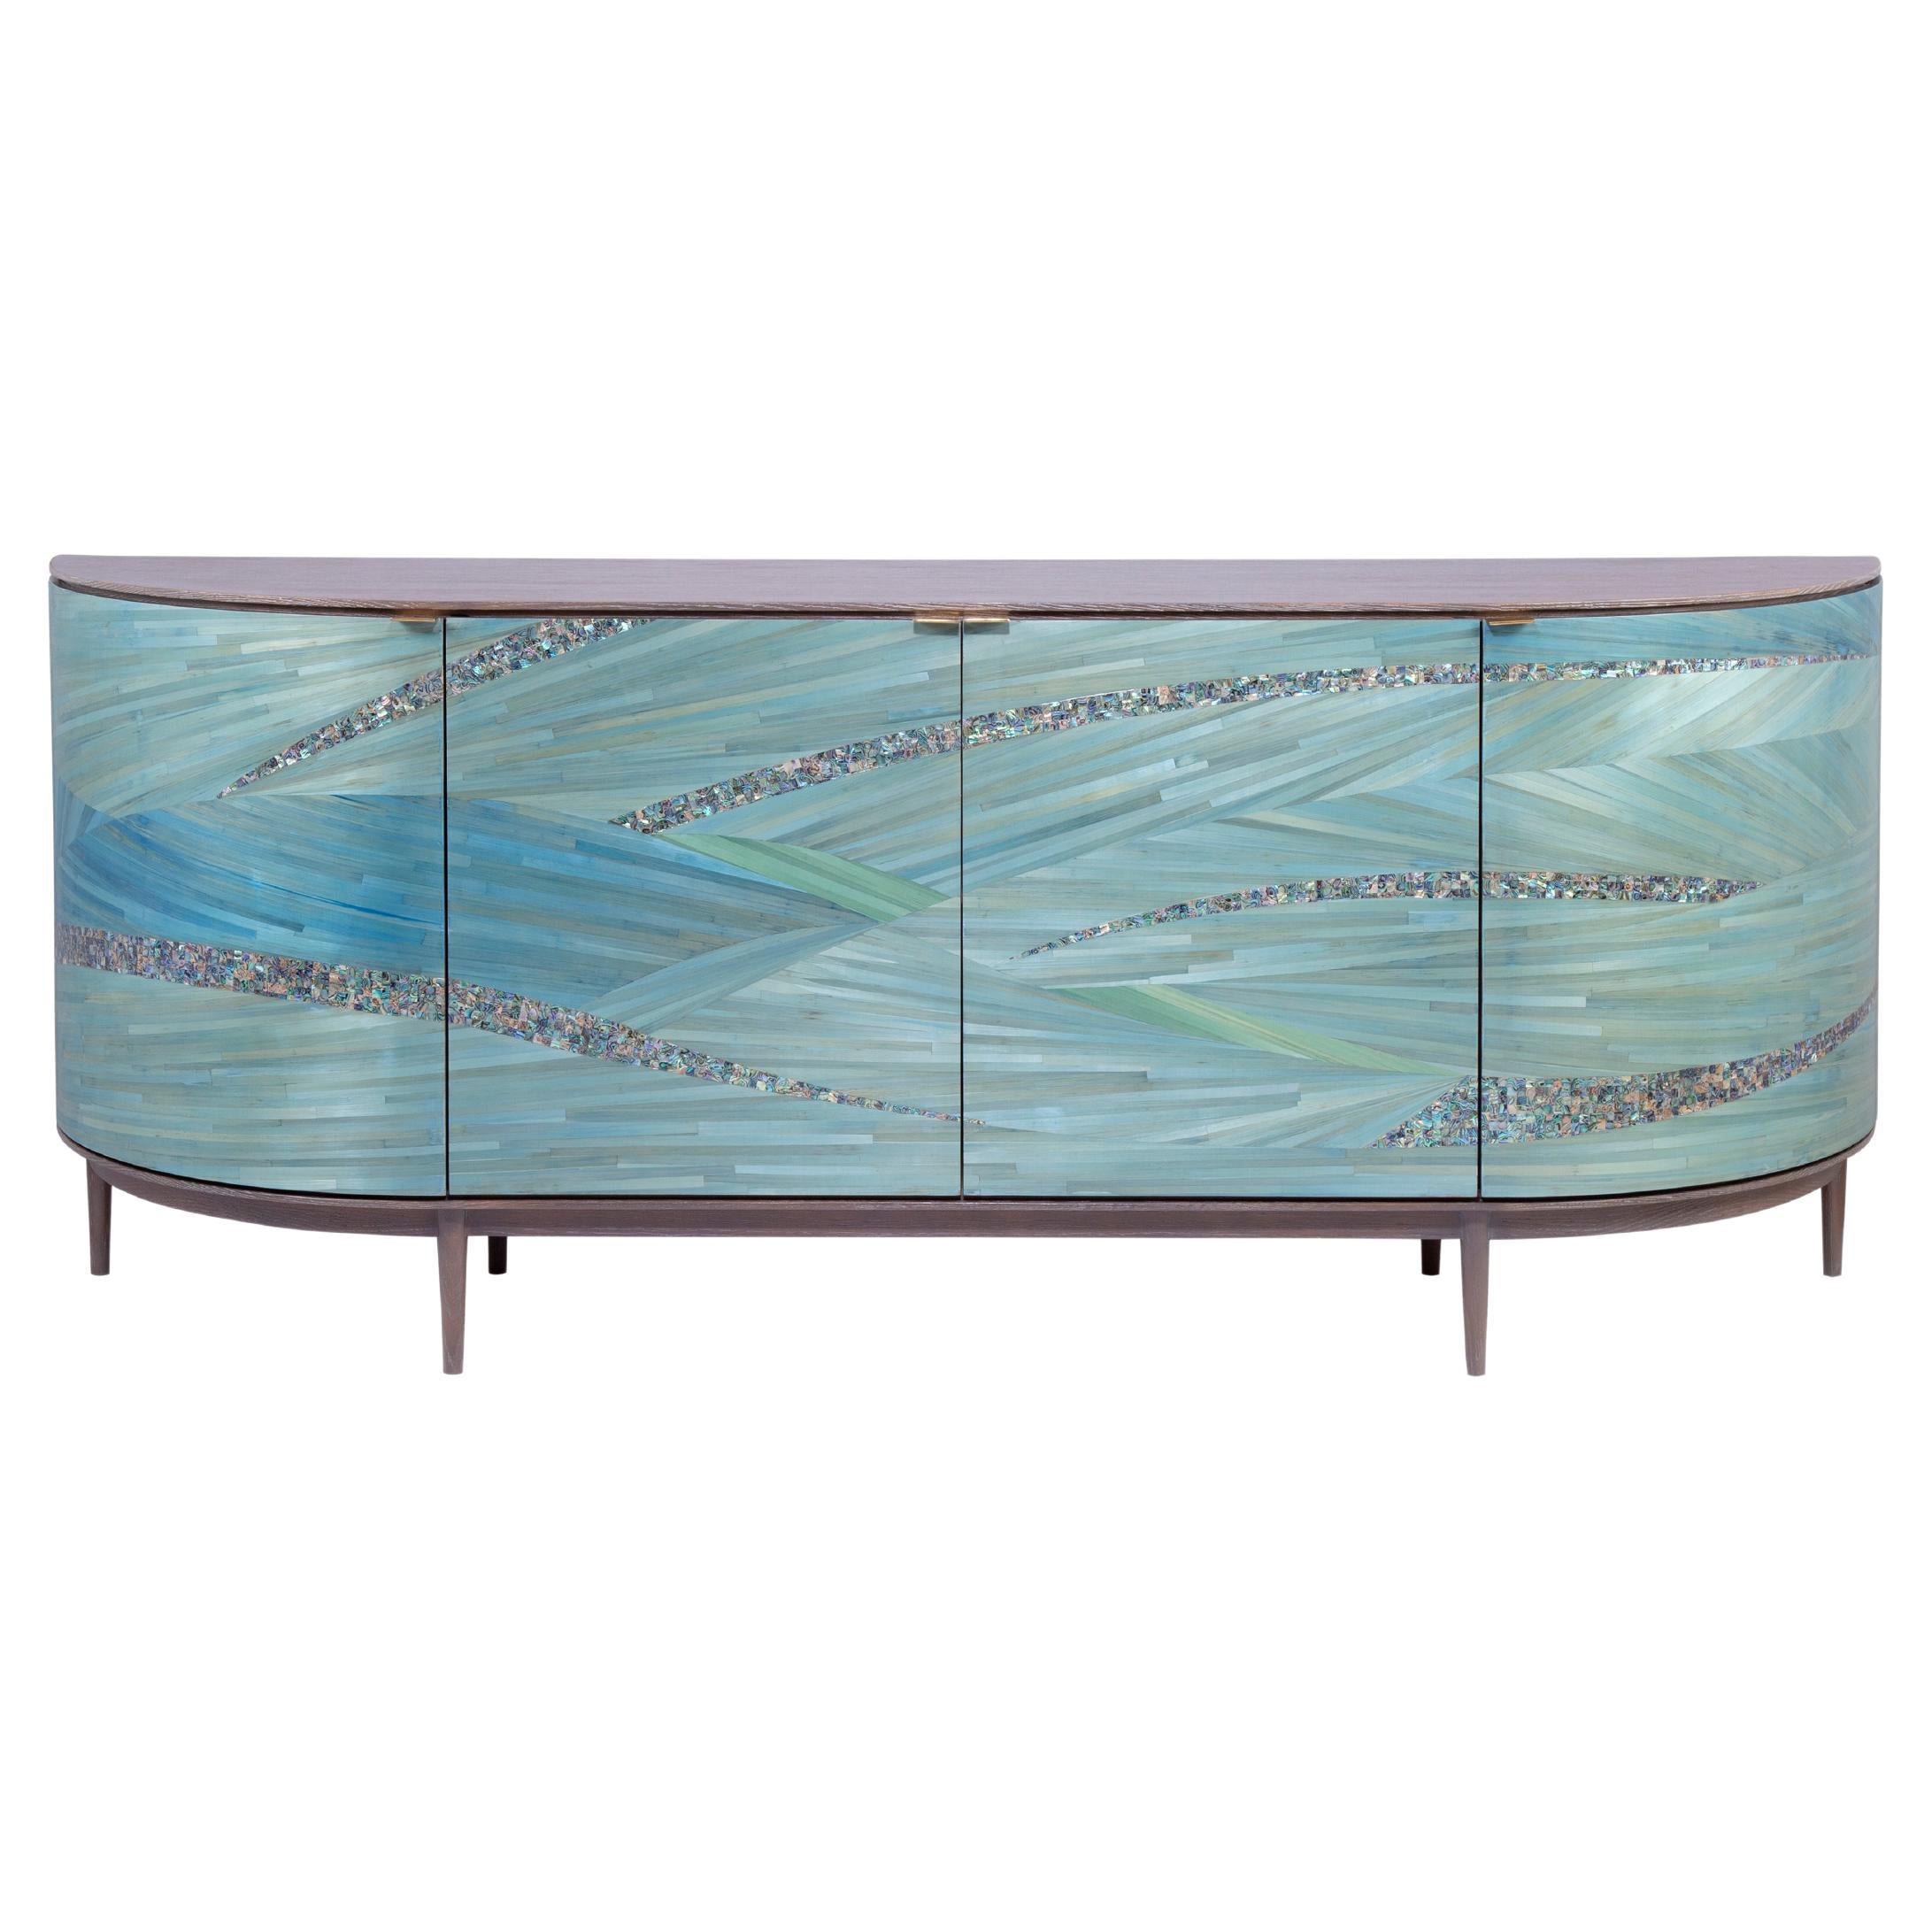 Luxury Sideboard with Rare Turquoise Mother of Pearl and Hand-Laid Blue Straw